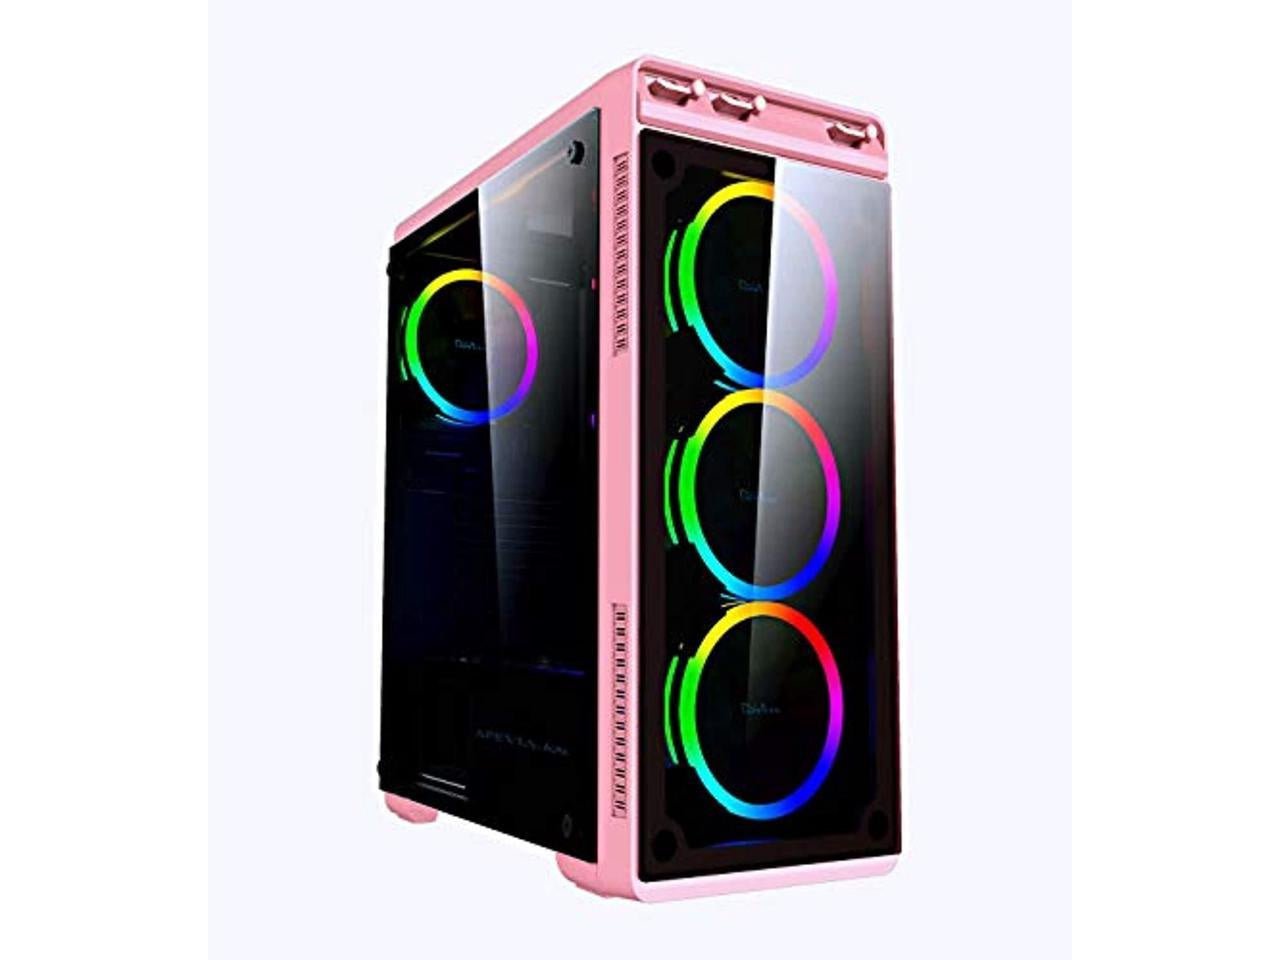 Apevia Aura-S-PK Mid Tower Gaming Case with 2 x Full-Size Tempered Glass Panel, Top USB3.0/USB2.0/Audio Ports, 4 x RGB Fans, Pink Frame - Geek Tech